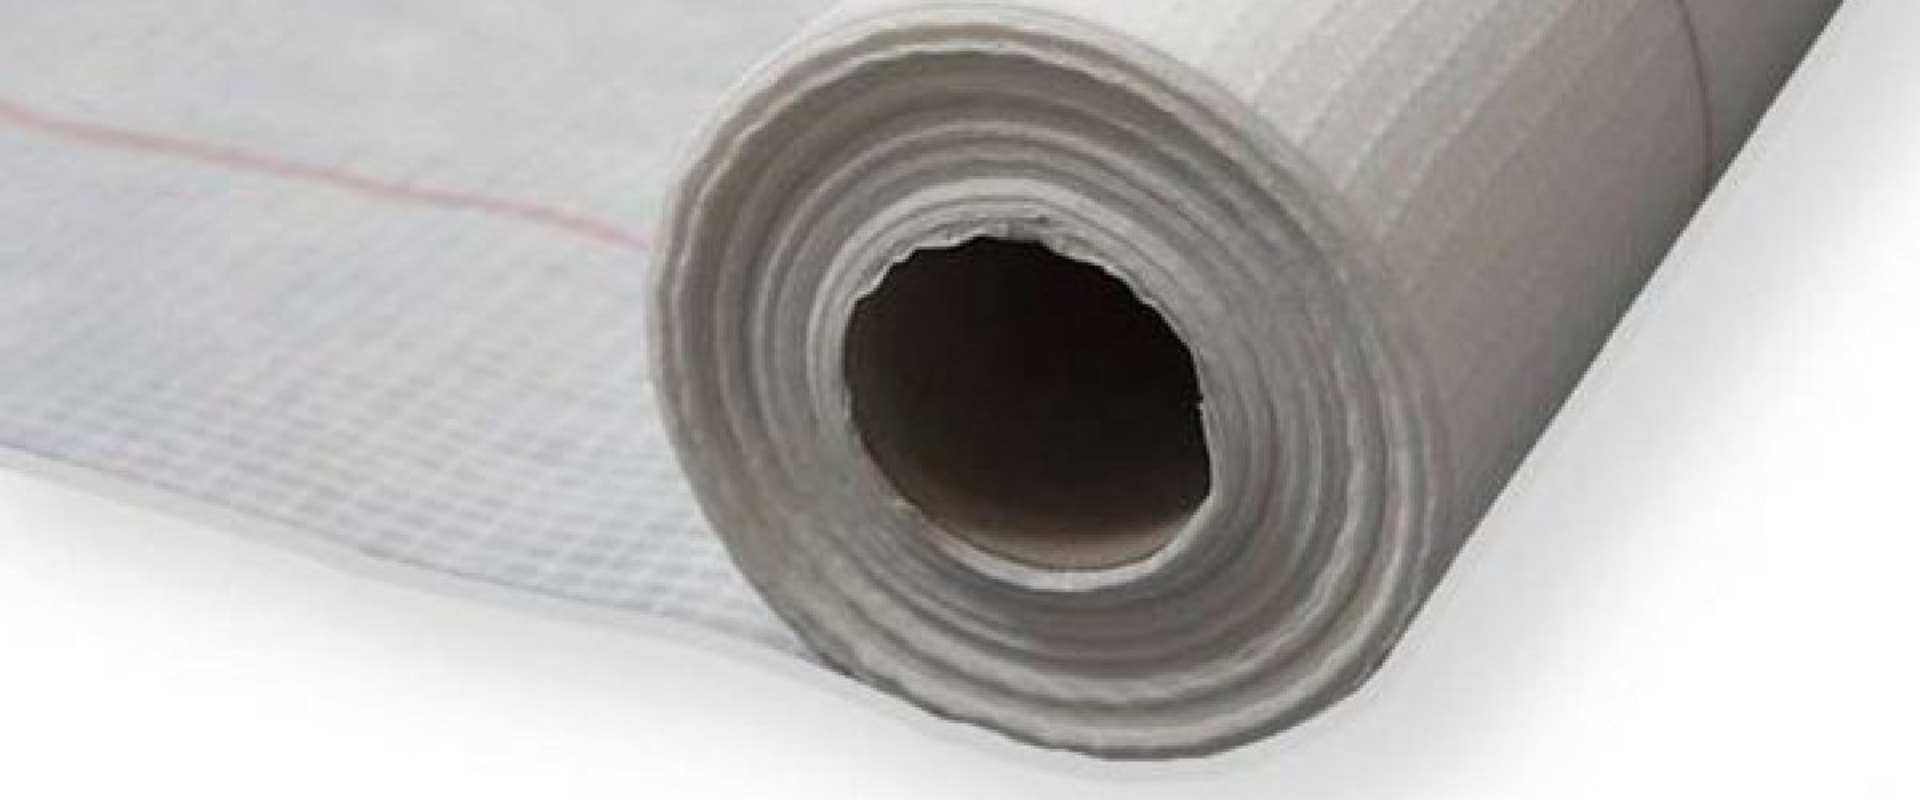 Interior Sealants and Membranes: An Overview